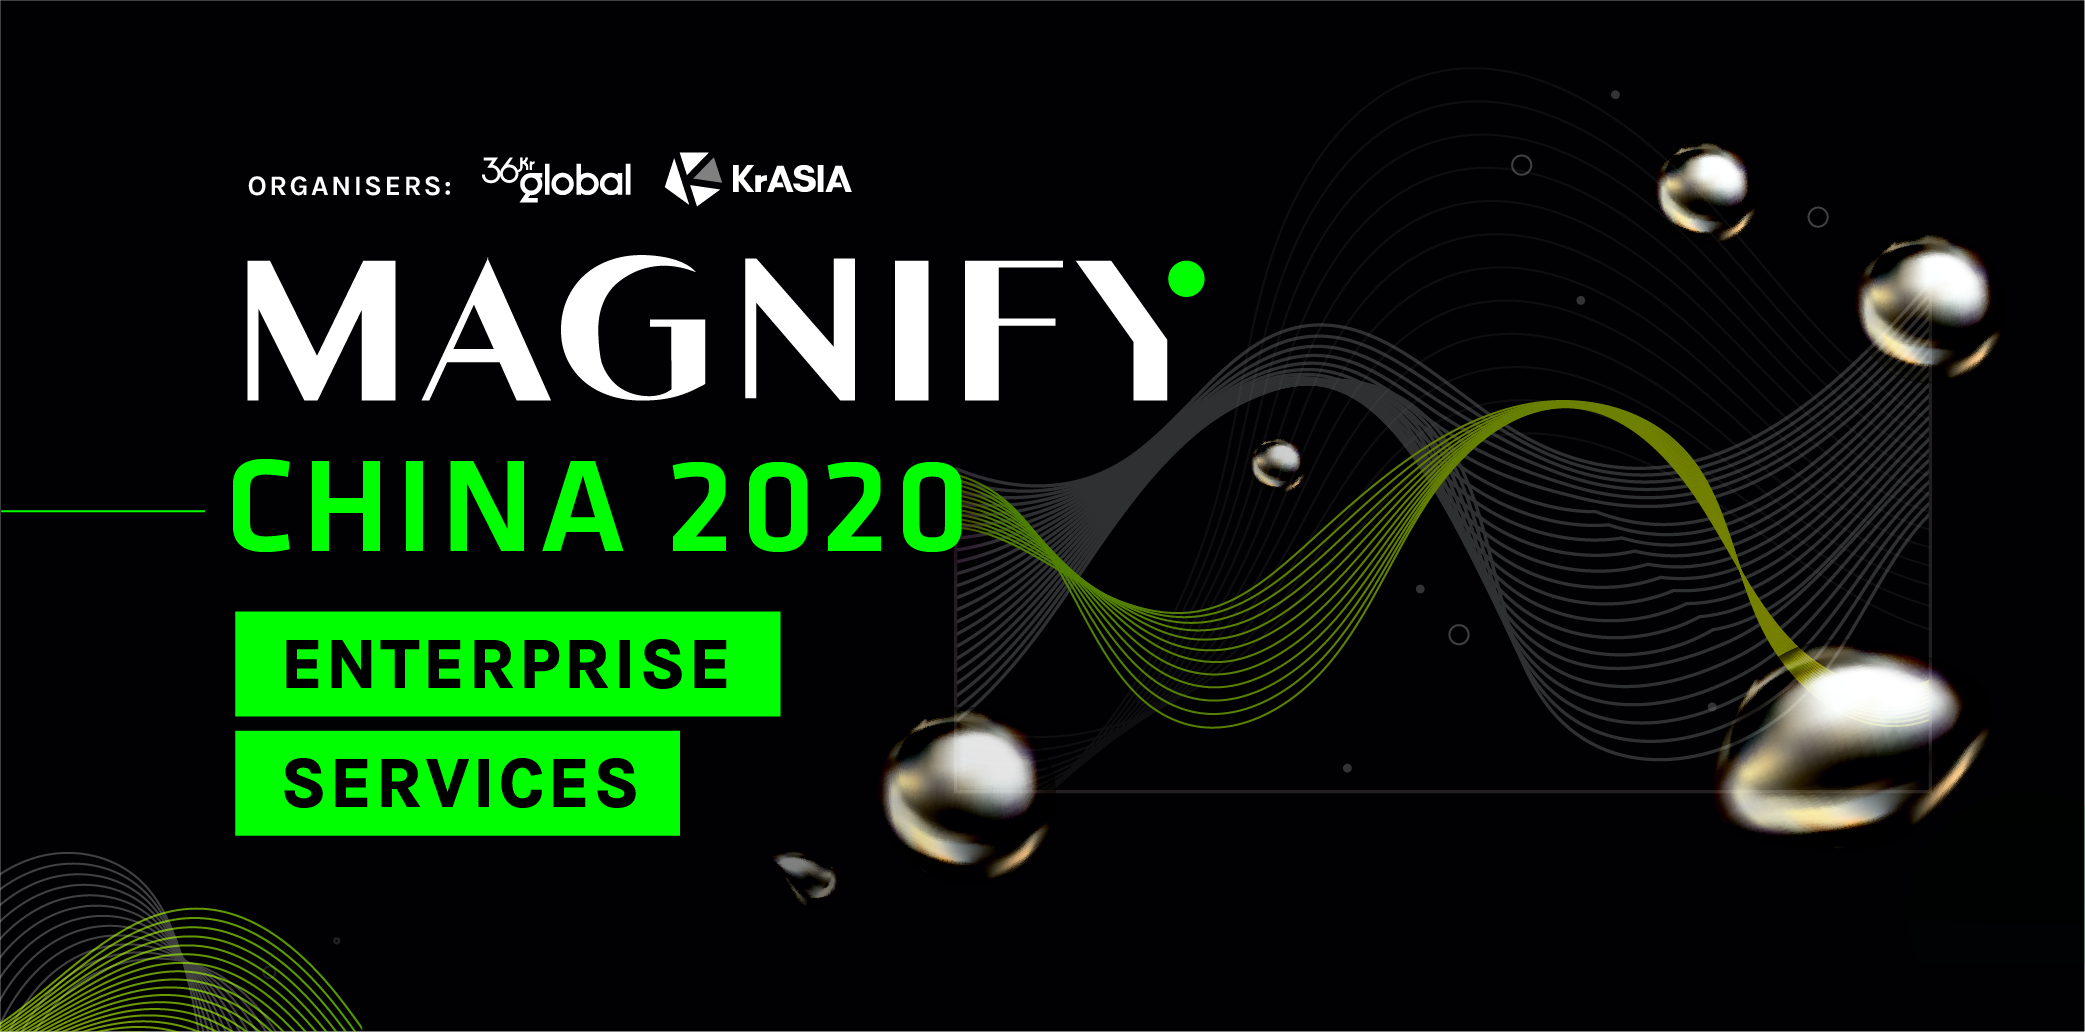 Enterprise Service’s challenge between scaling and customized solutions | KrASIA Magnify China 2020 Enterprise Services Recap